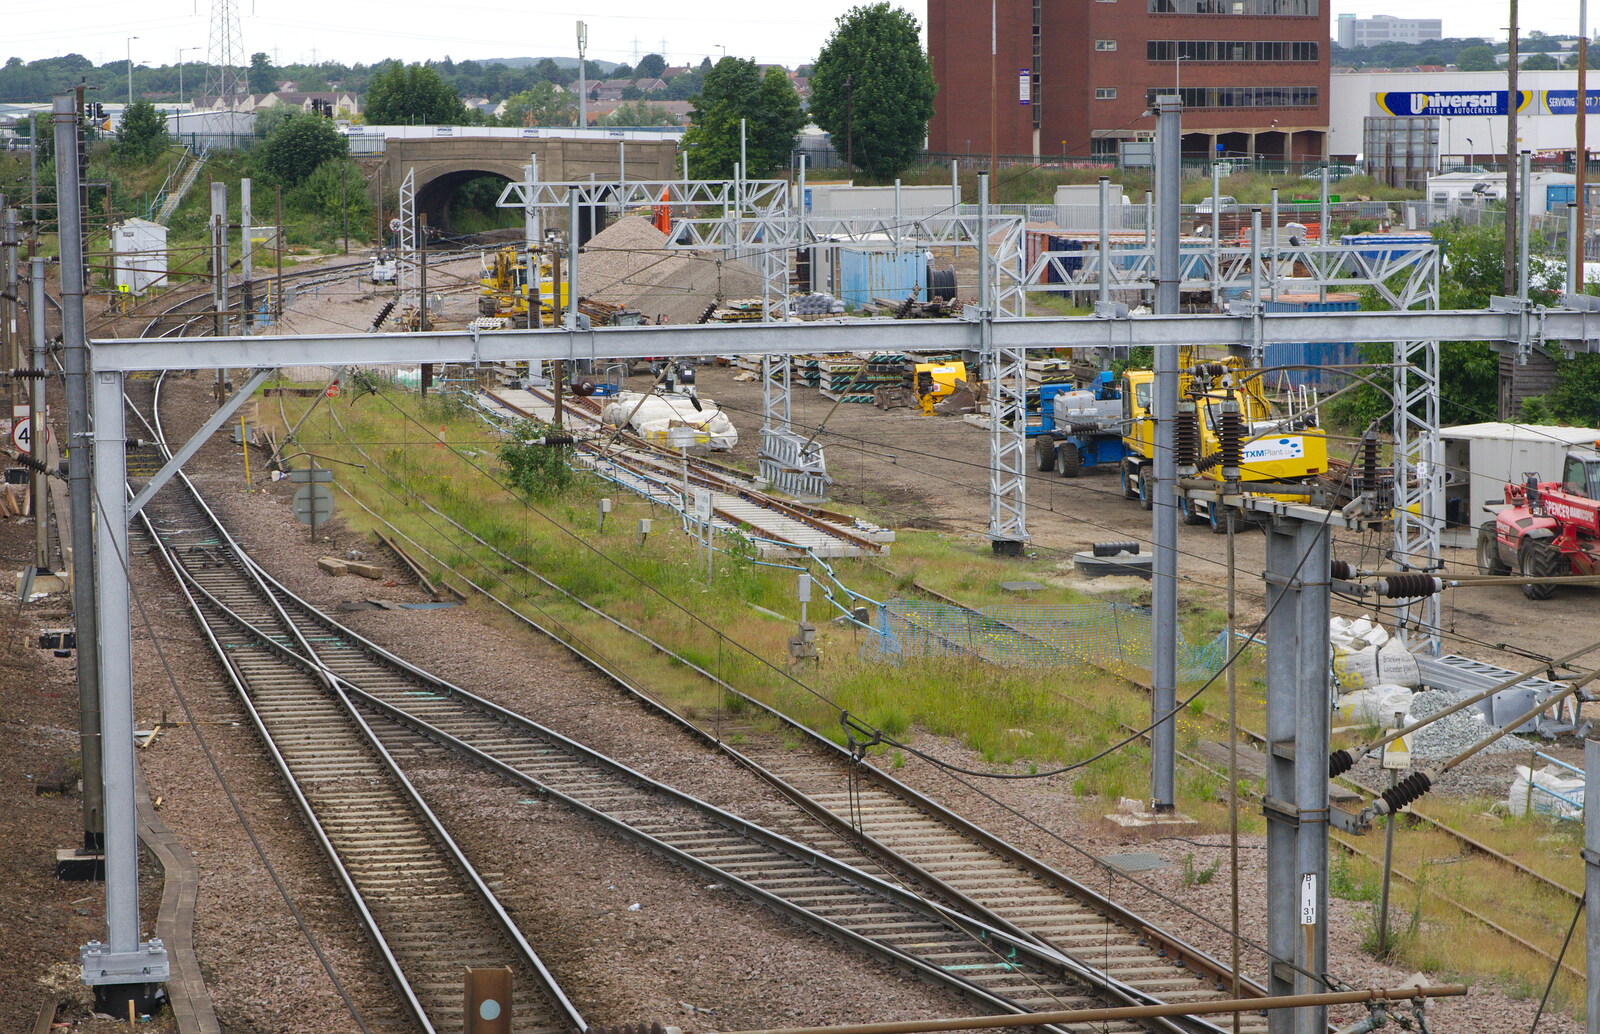 New overhead line gantries are being installed from Isobel's Race For Life, Chantry Park, Ipswich - 11th June 2014